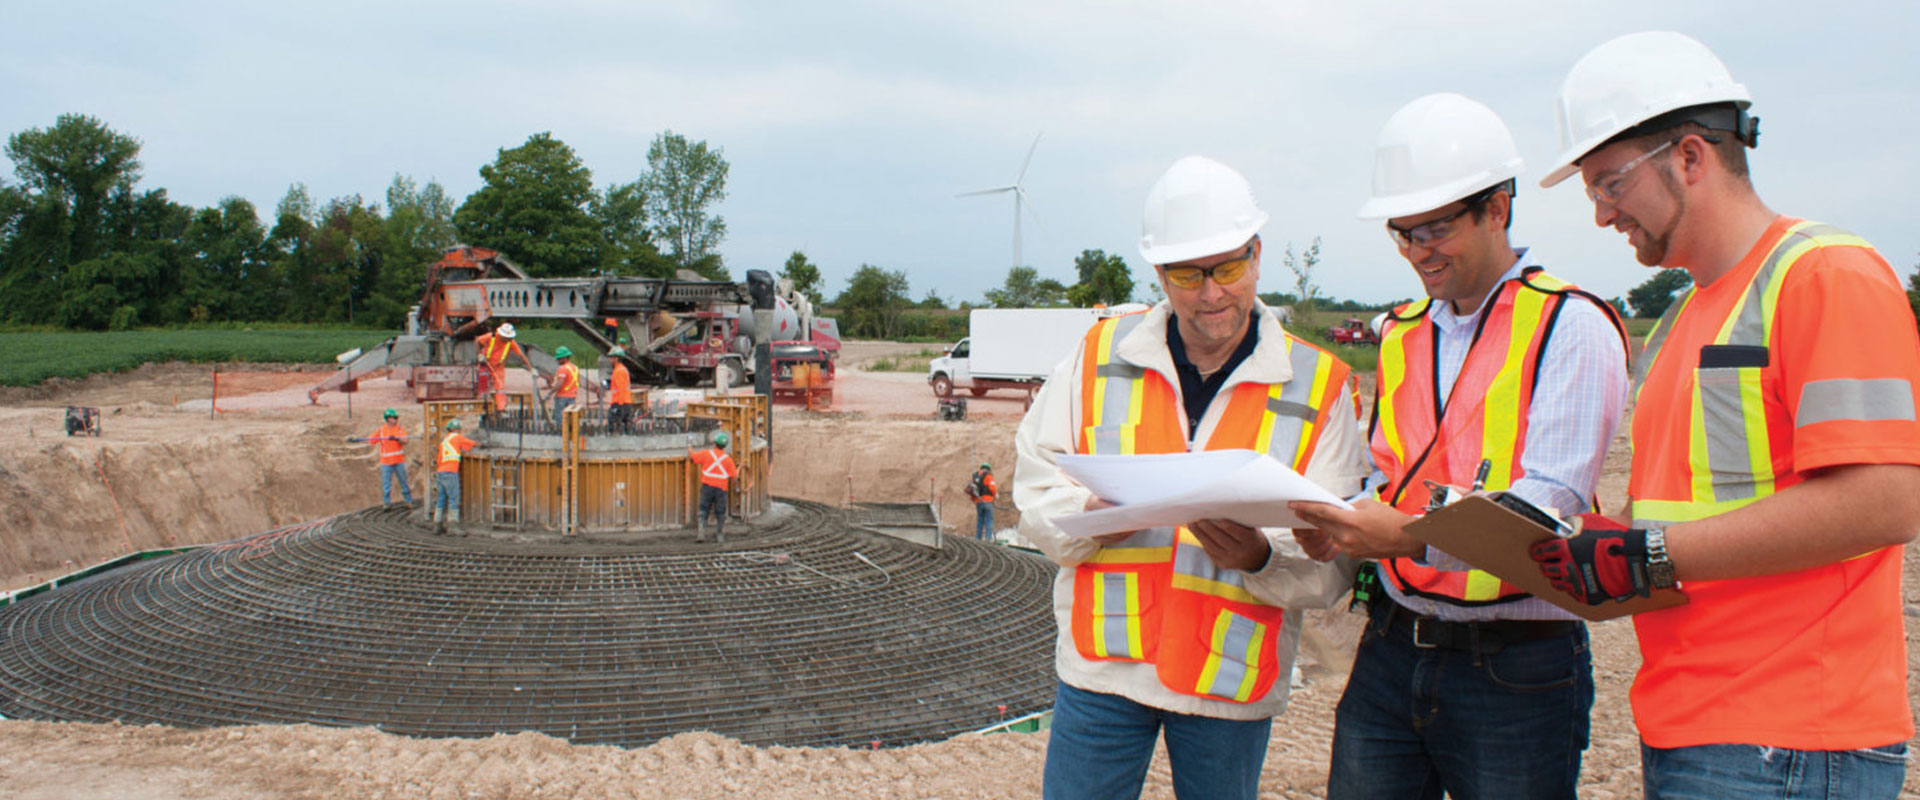 B&M project engineers and managers at a turbine base construction site discussing progress